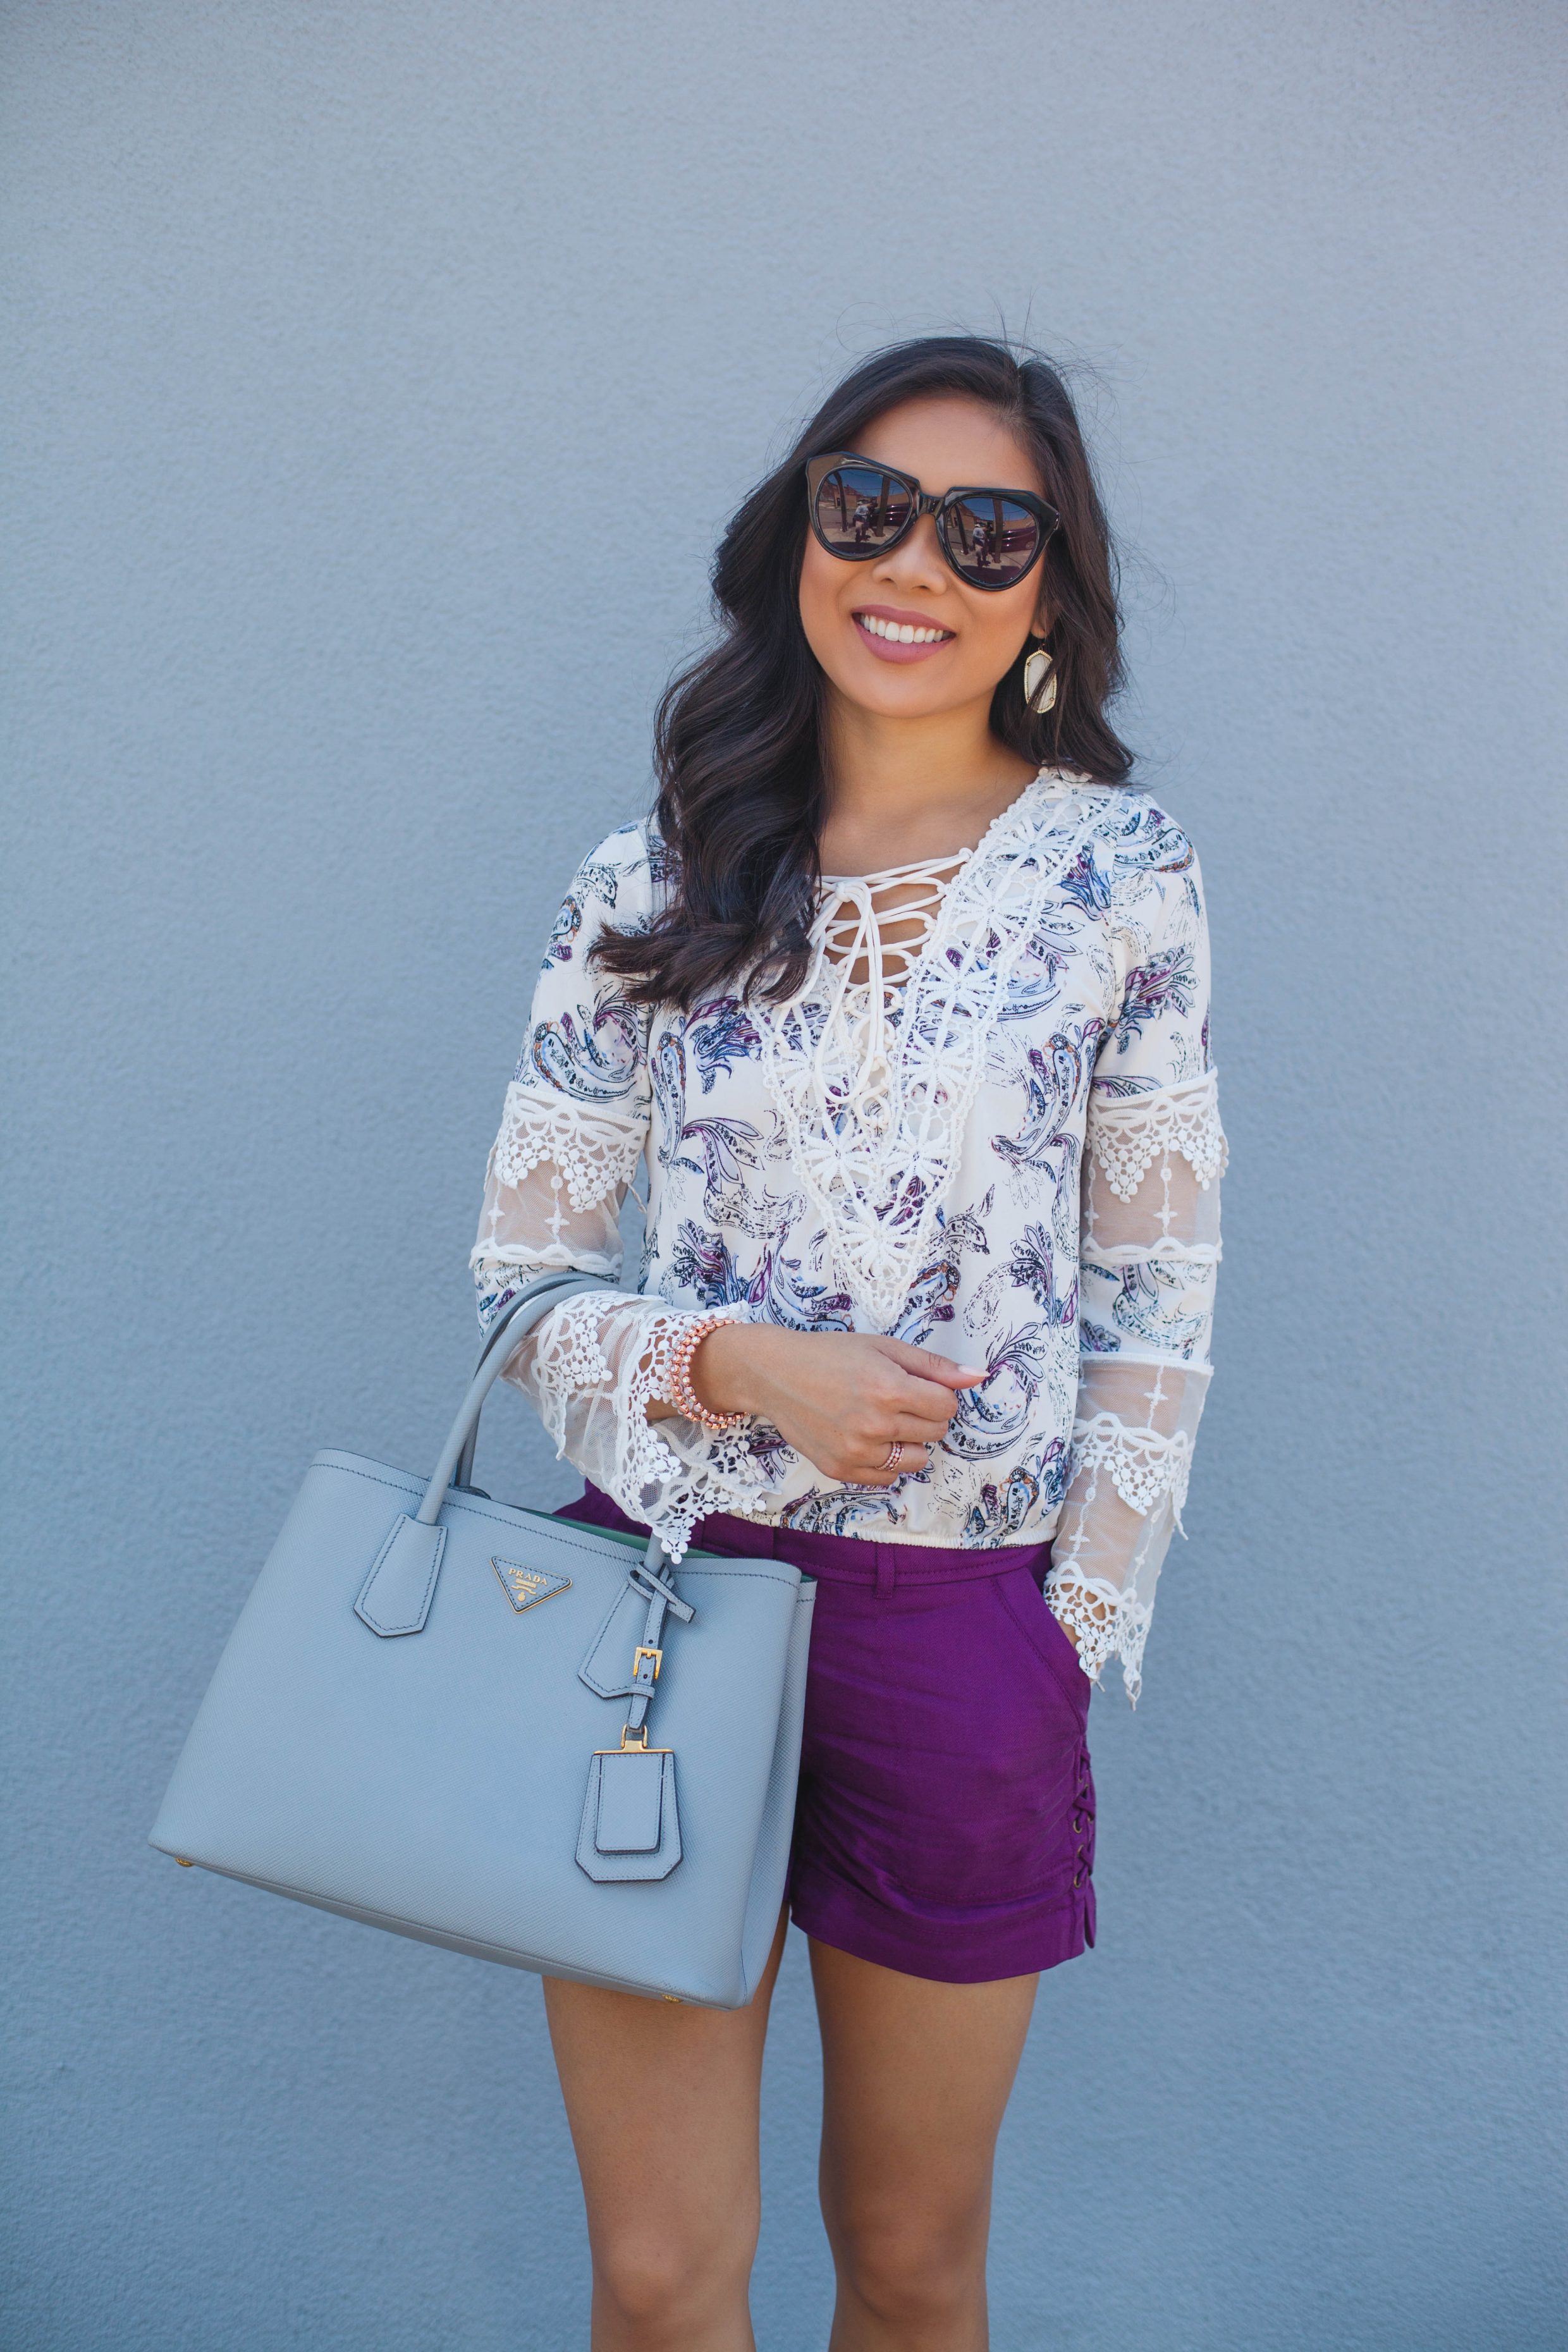 Dressy Casual :: Lace-Up Floral Top & Purple Shorts - Color & Chic